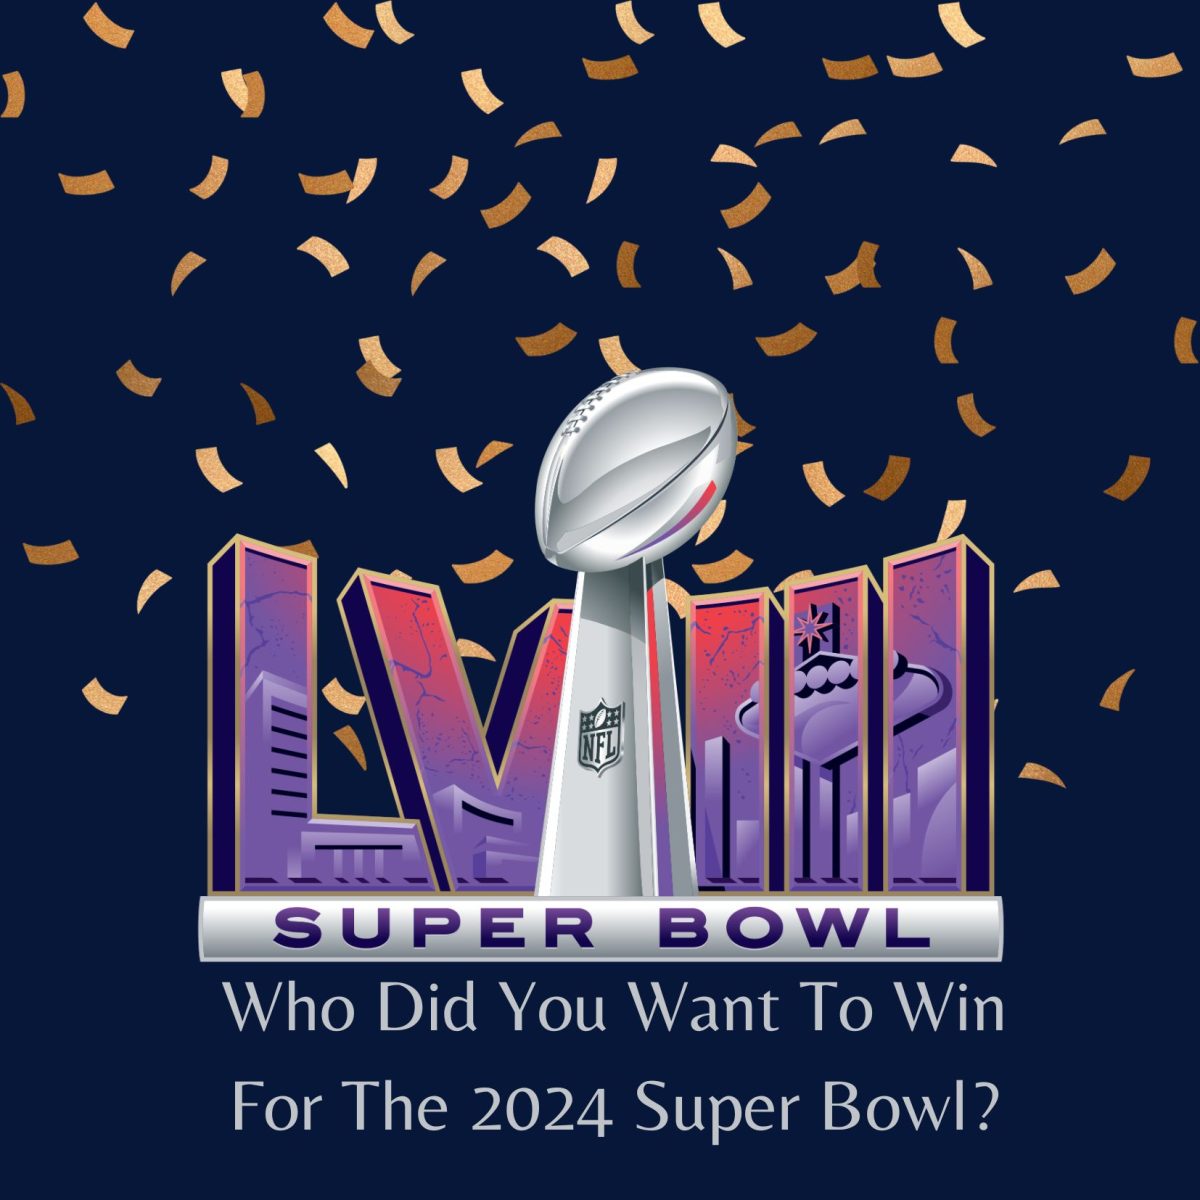 Who Did You Want To Win For The 2024 Super Bowl?